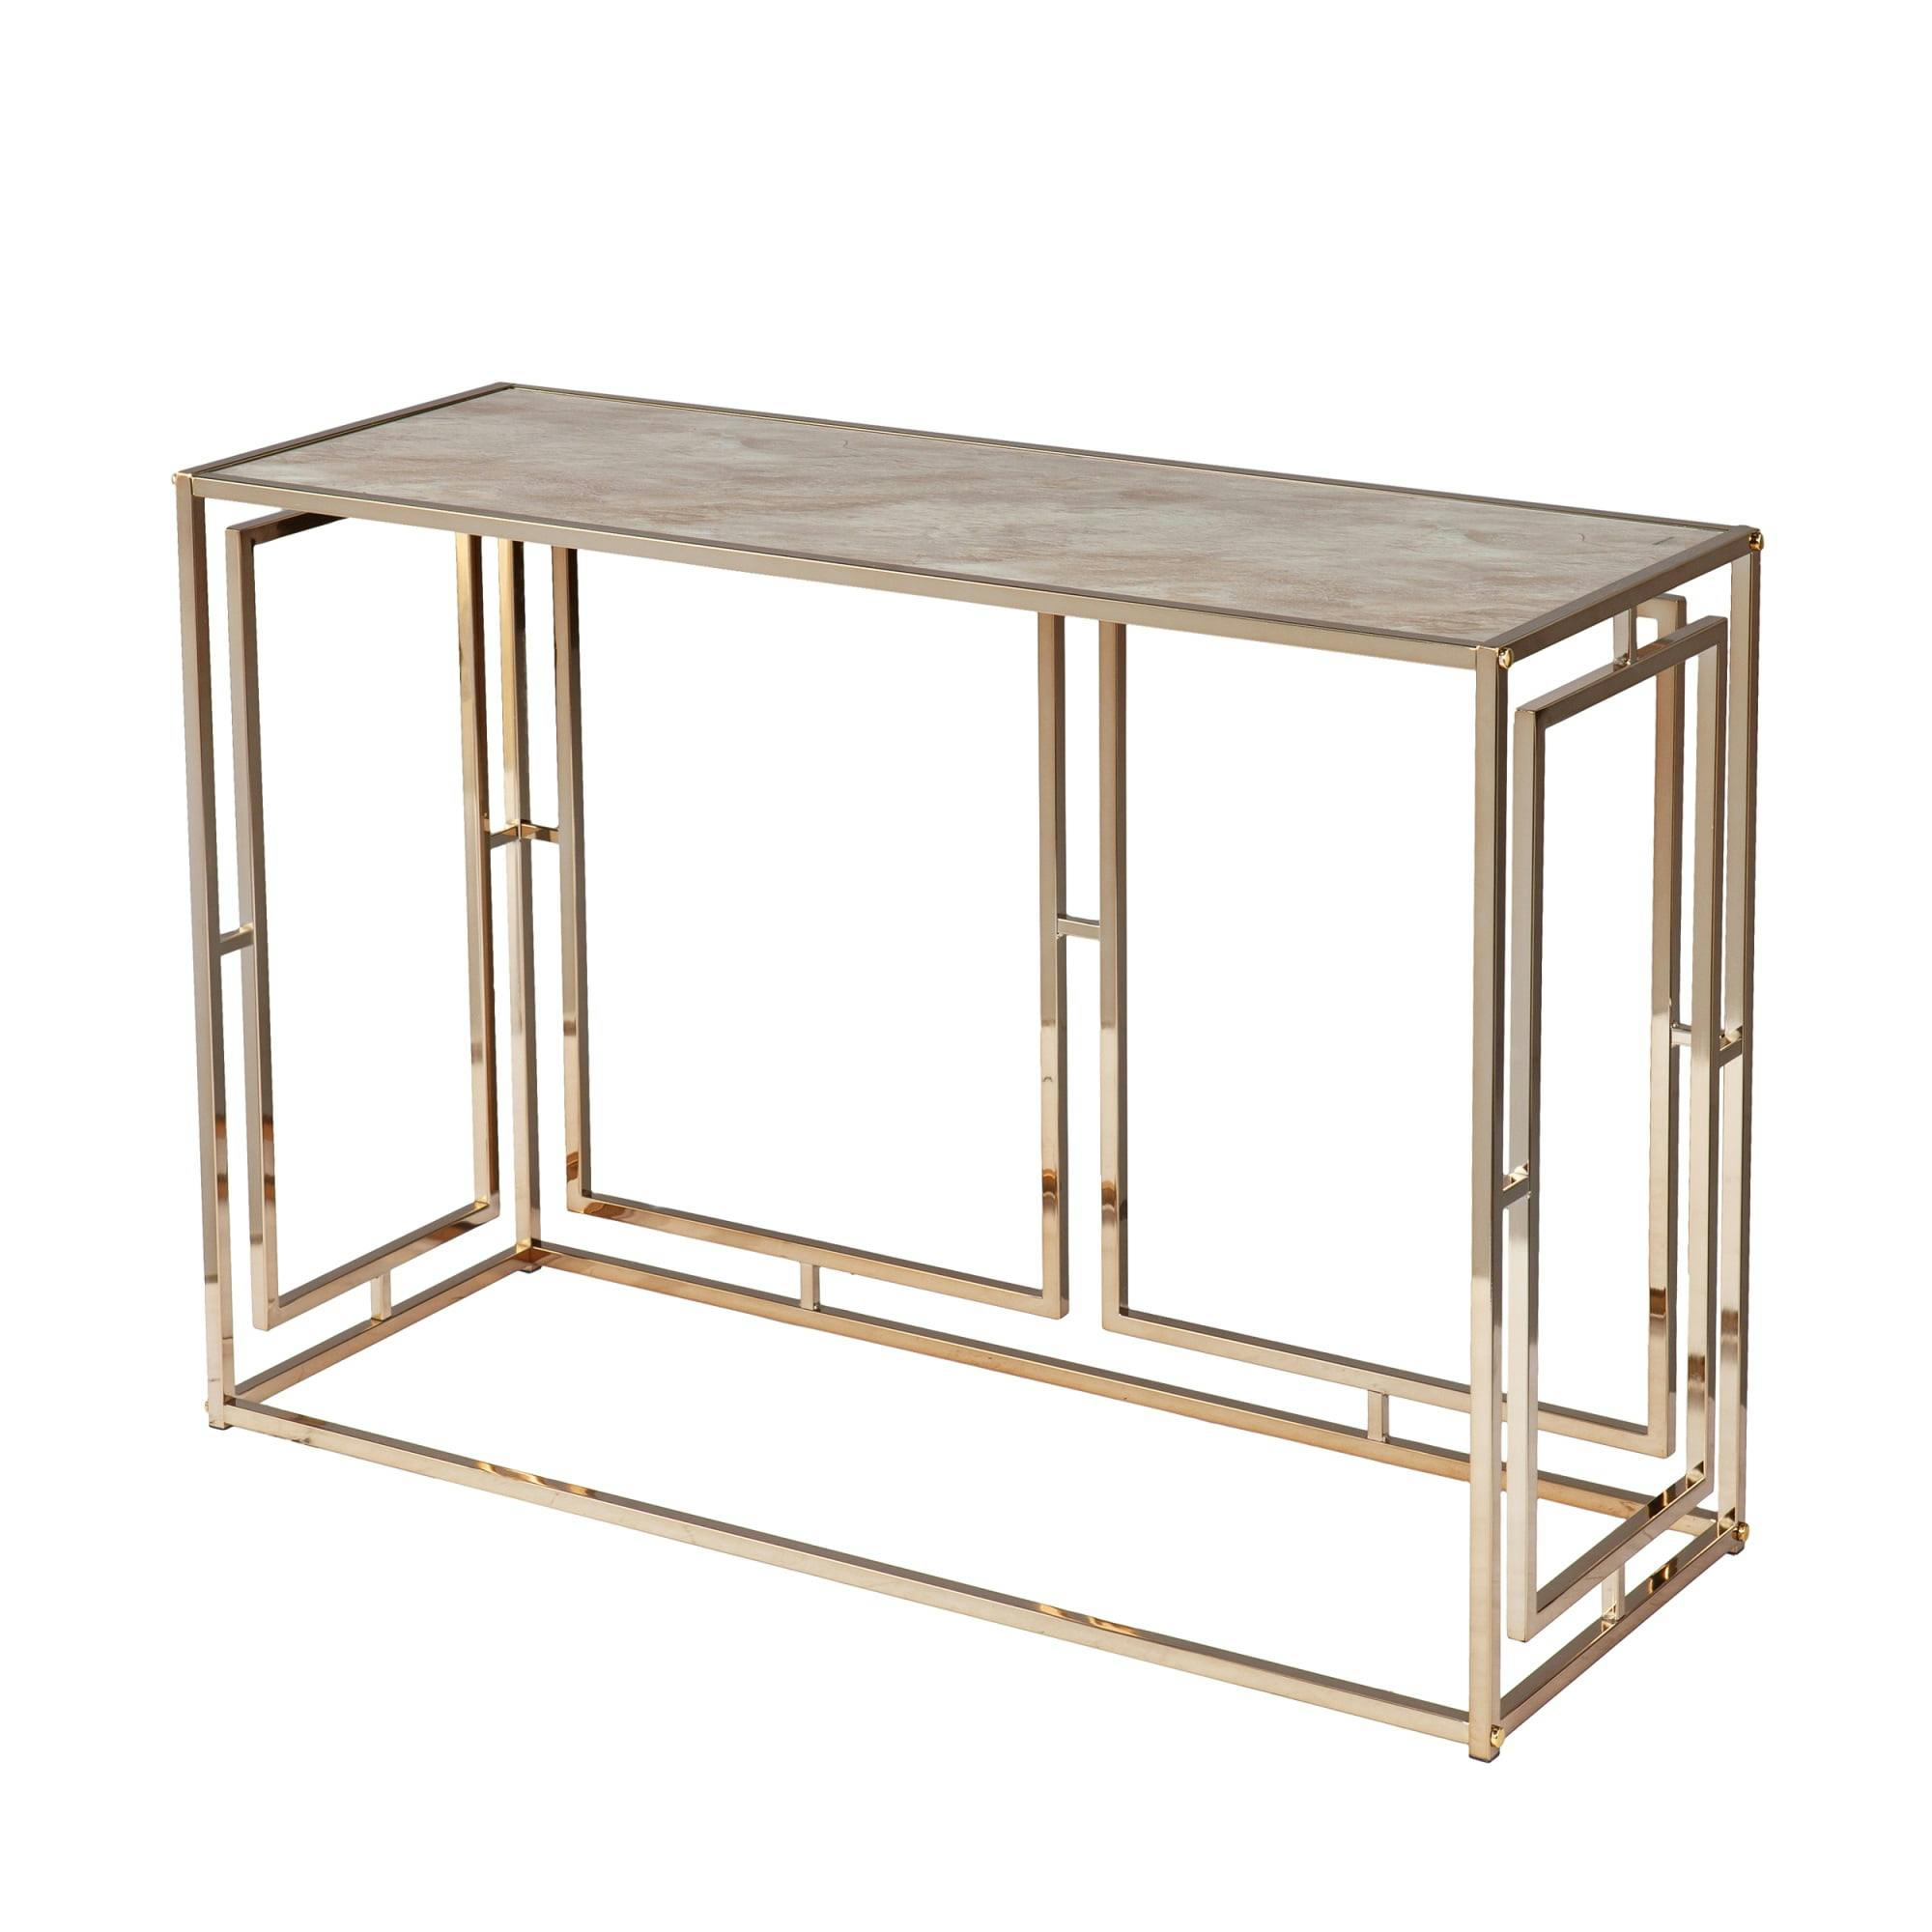 Elegant 43.75" Faux Marble Glass-Top Console Table with Metallic Frame